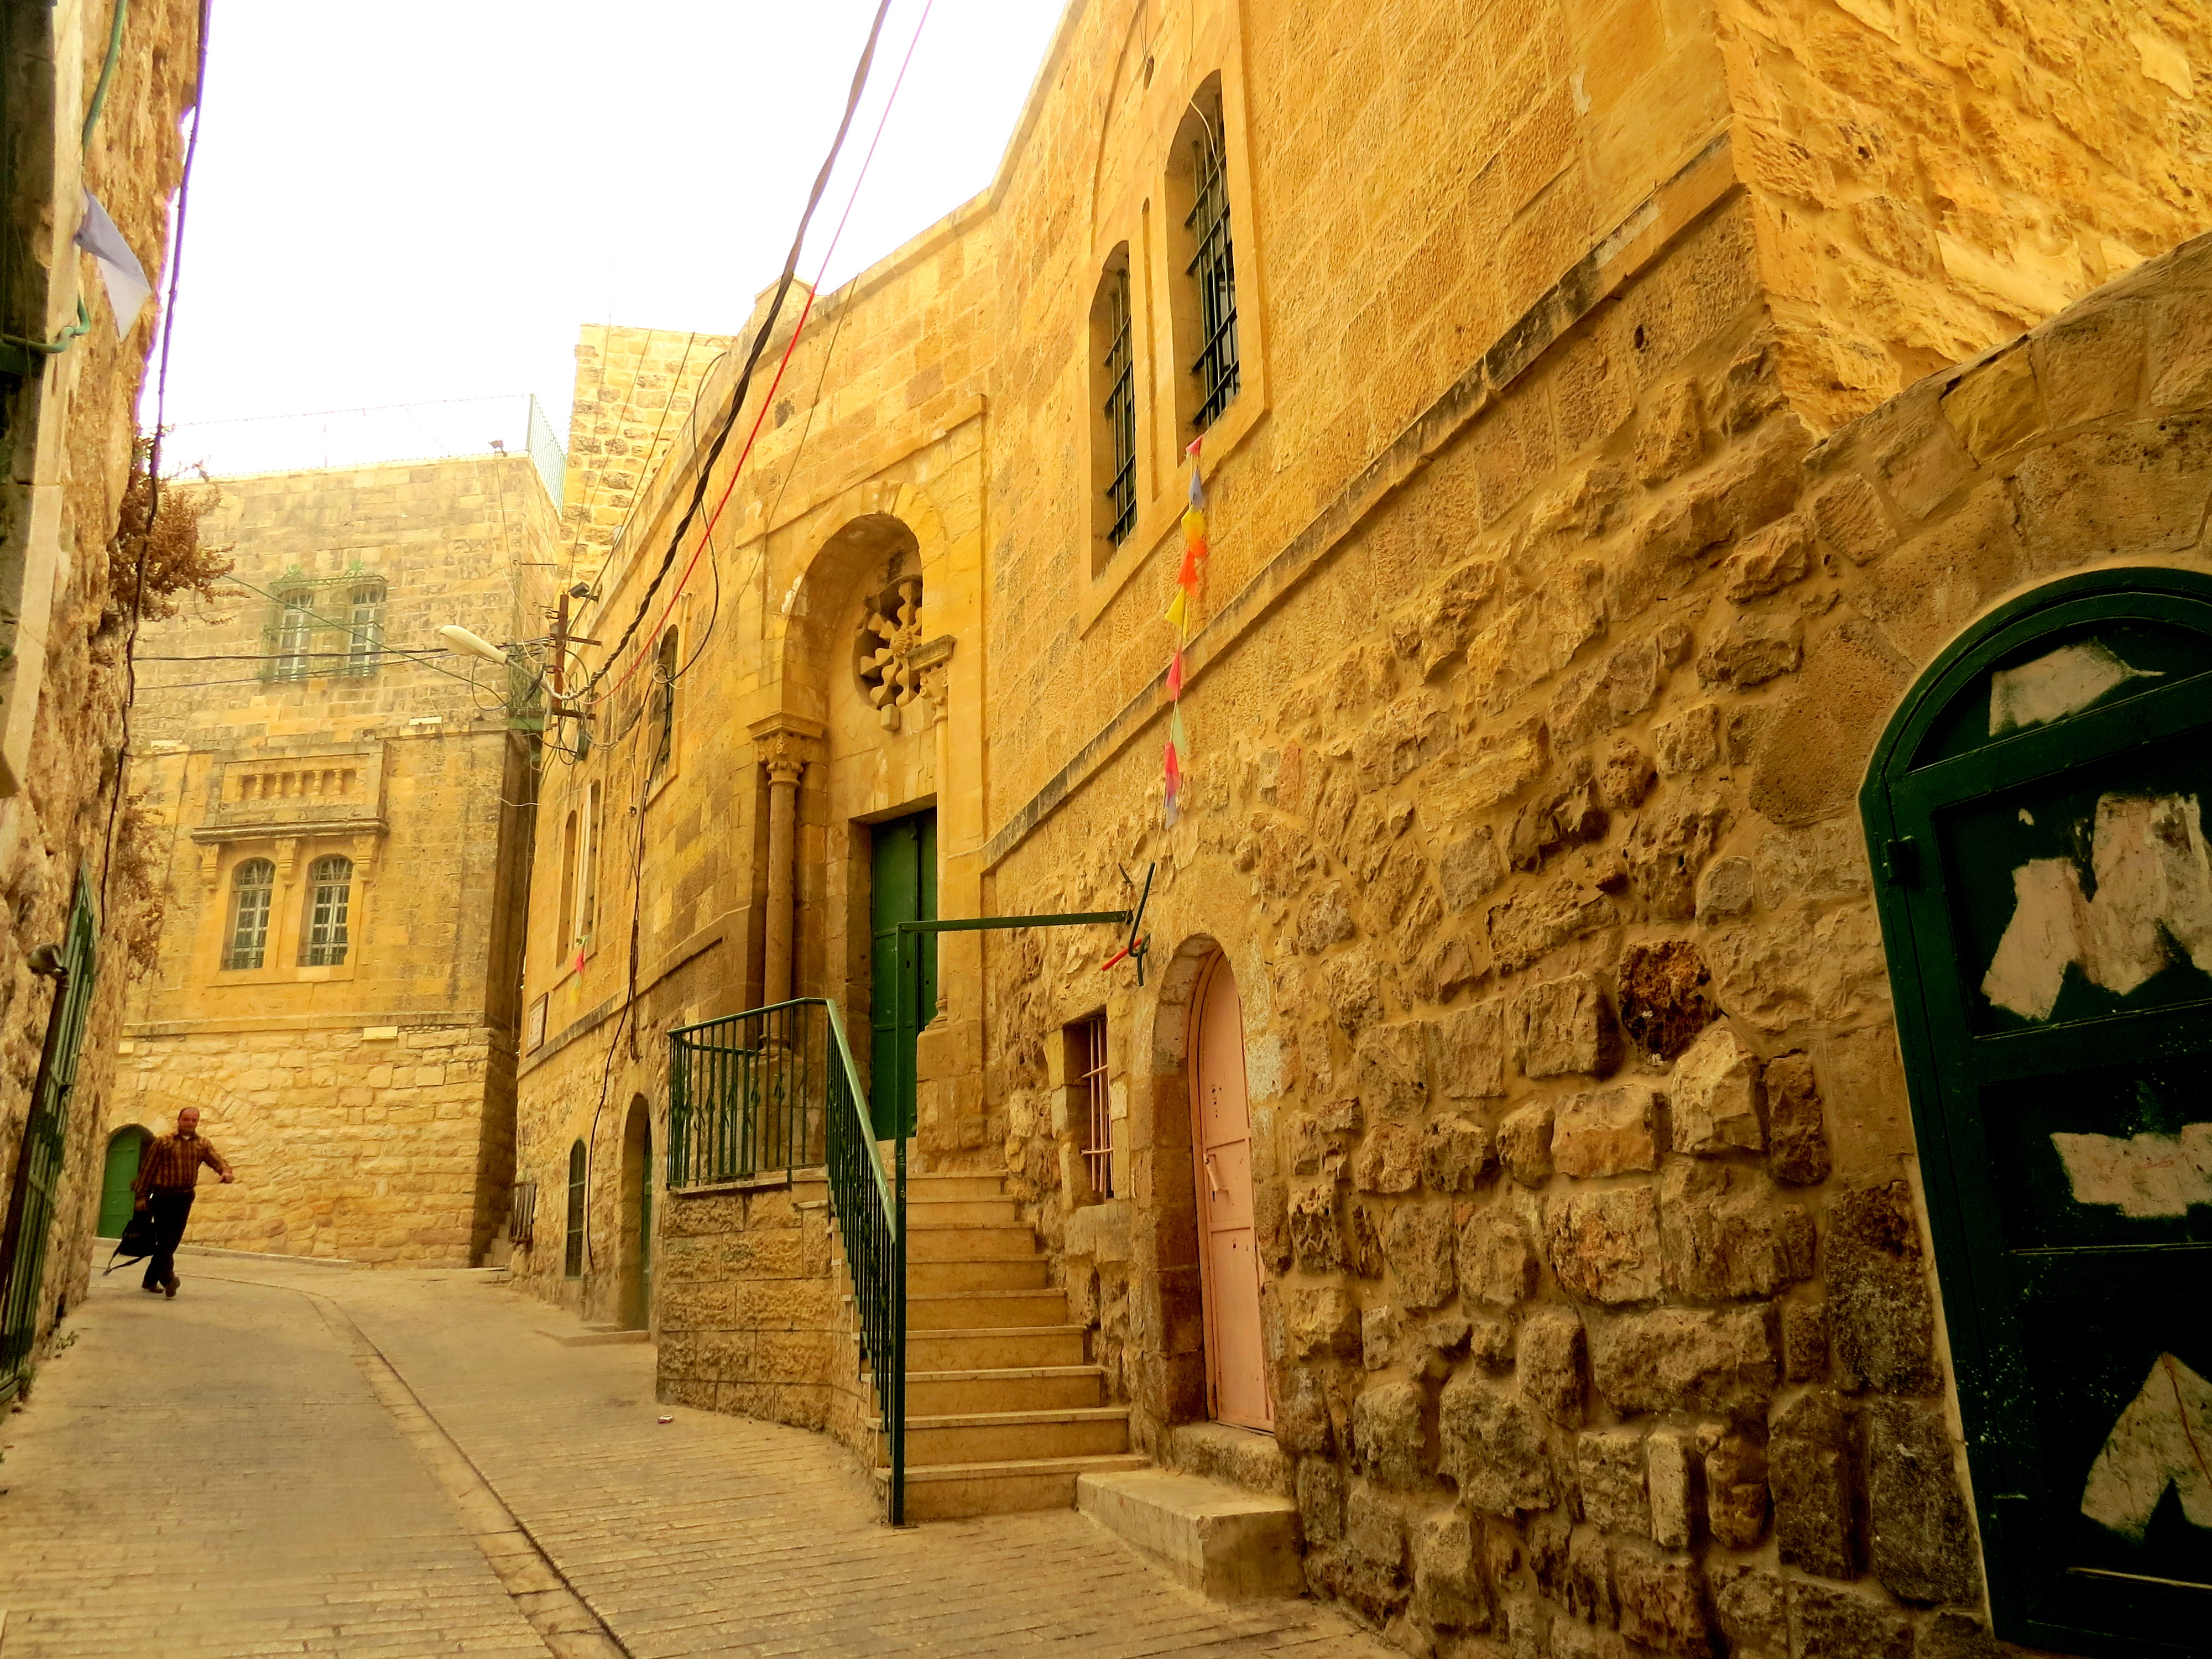 Arab News: Palestinians reject Israeli attempts to control Hebron mosque